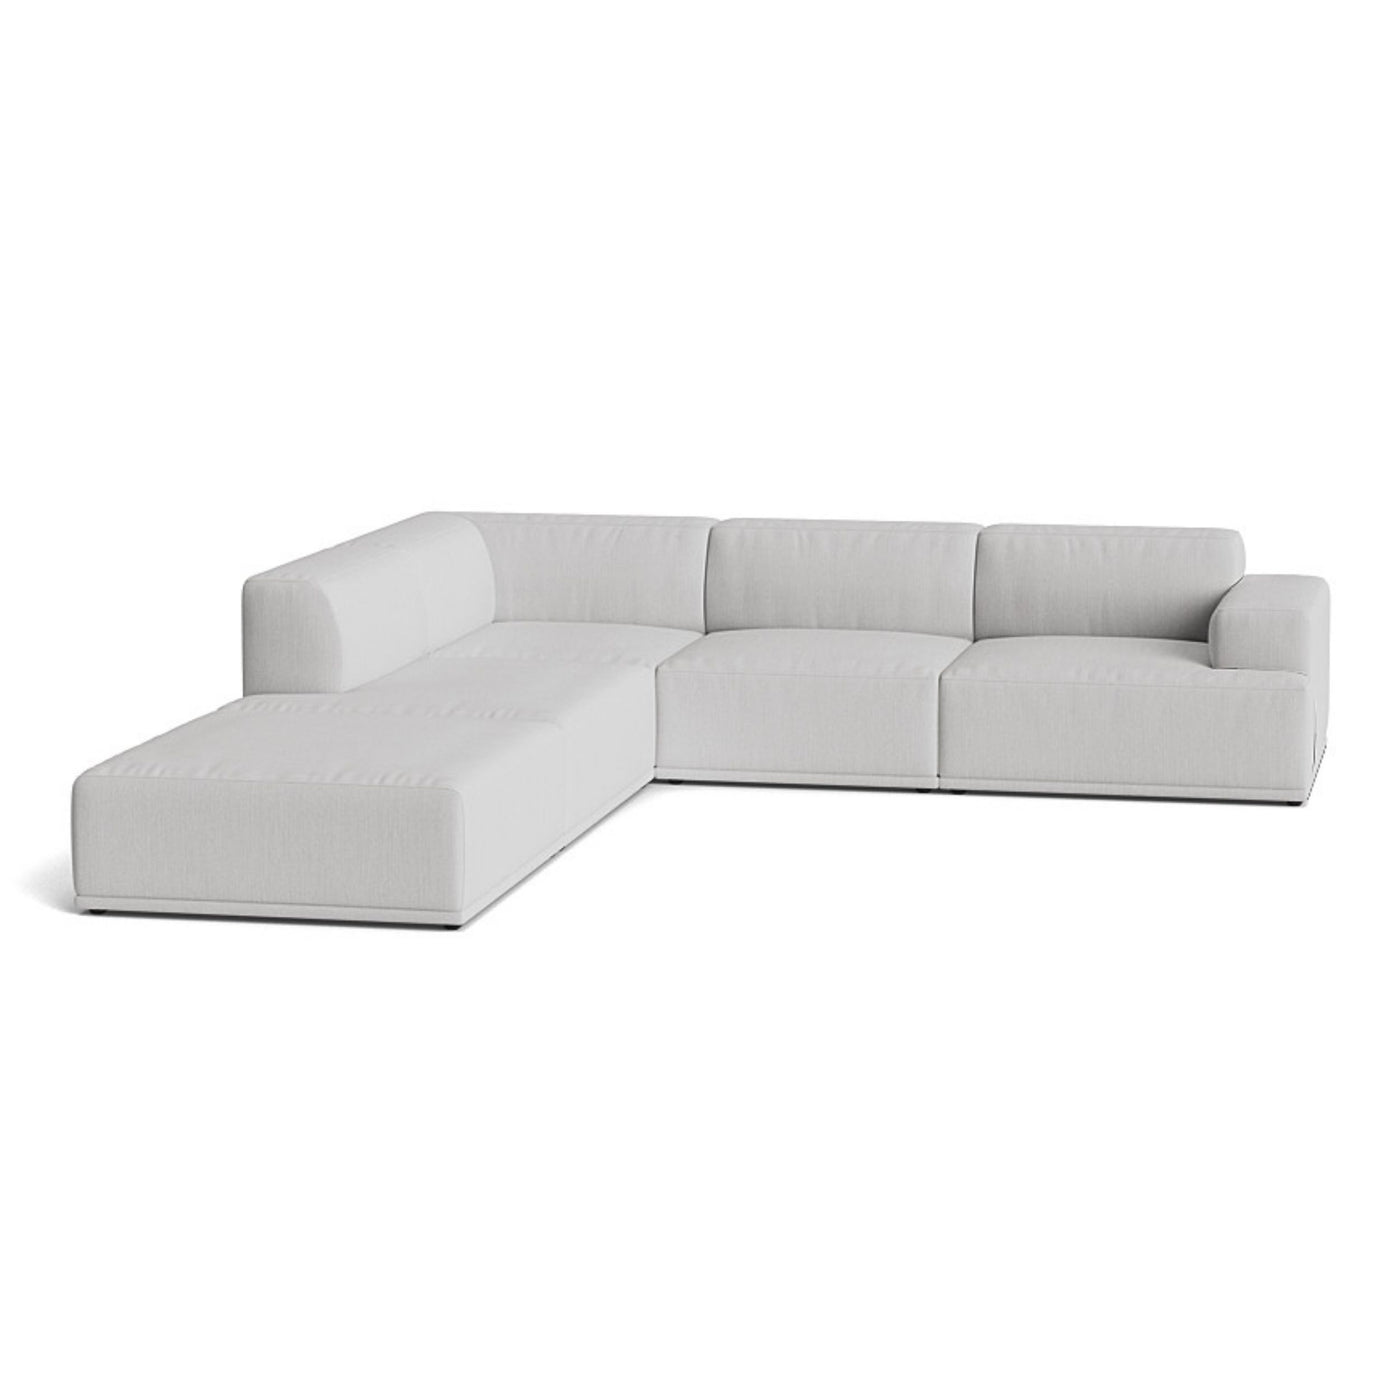 Muuto Connect Soft Modular Corner Sofa, configuration 1. Made-to-order from someday designs. #colour_balder-132